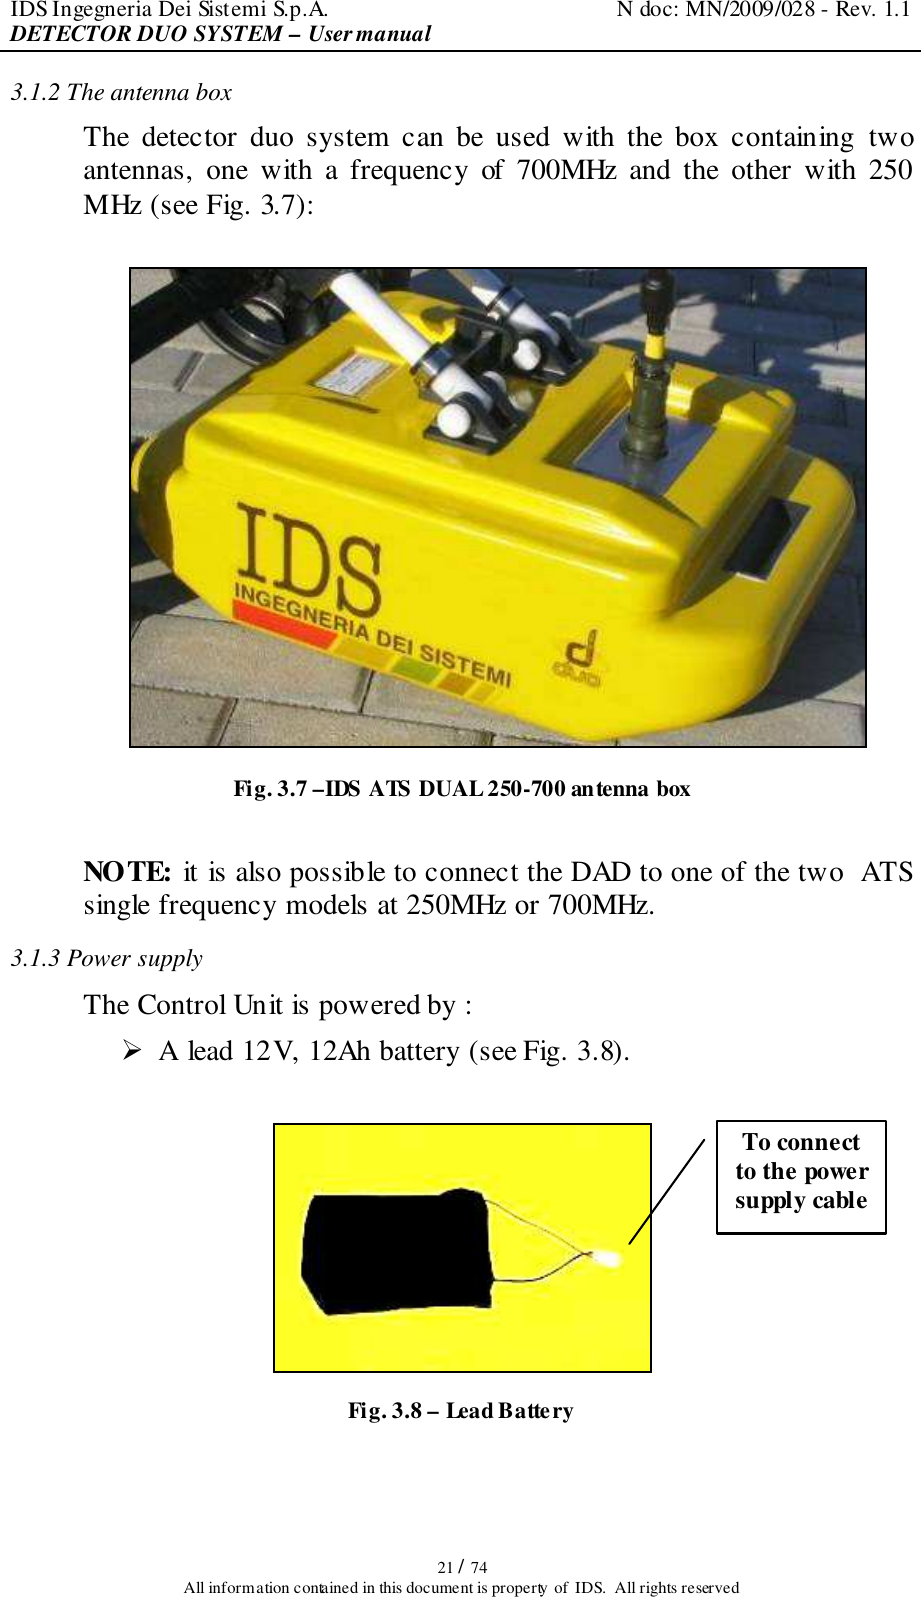 IDS Ingegneria Dei Sistemi S.p.A.  N doc: MN/2009/028 - Rev. 1.1 DETECTOR DUO SYSTEM – User manual   21 / 74 All information contained in this document is property of  IDS.  All rights reserved 3.1.2 The antenna box  The  detector  duo  system  can  be  used  with  the  box  containing  two antennas,  one  with  a  frequency  of  700MHz  and  the  other  with  250 MHz (see Fig. 3.7):   Fig. 3.7 –IDS ATS DUAL 250-700 antenna box   NOTE: it is also possible to connect the DAD to one of the two  ATS single frequency models at 250MHz or 700MHz. 3.1.3 Power supply The Control Unit is powered by :  A lead 12V, 12Ah battery (see Fig. 3.8).   Fig. 3.8 – Lead Battery  To connect to the power supply cable  